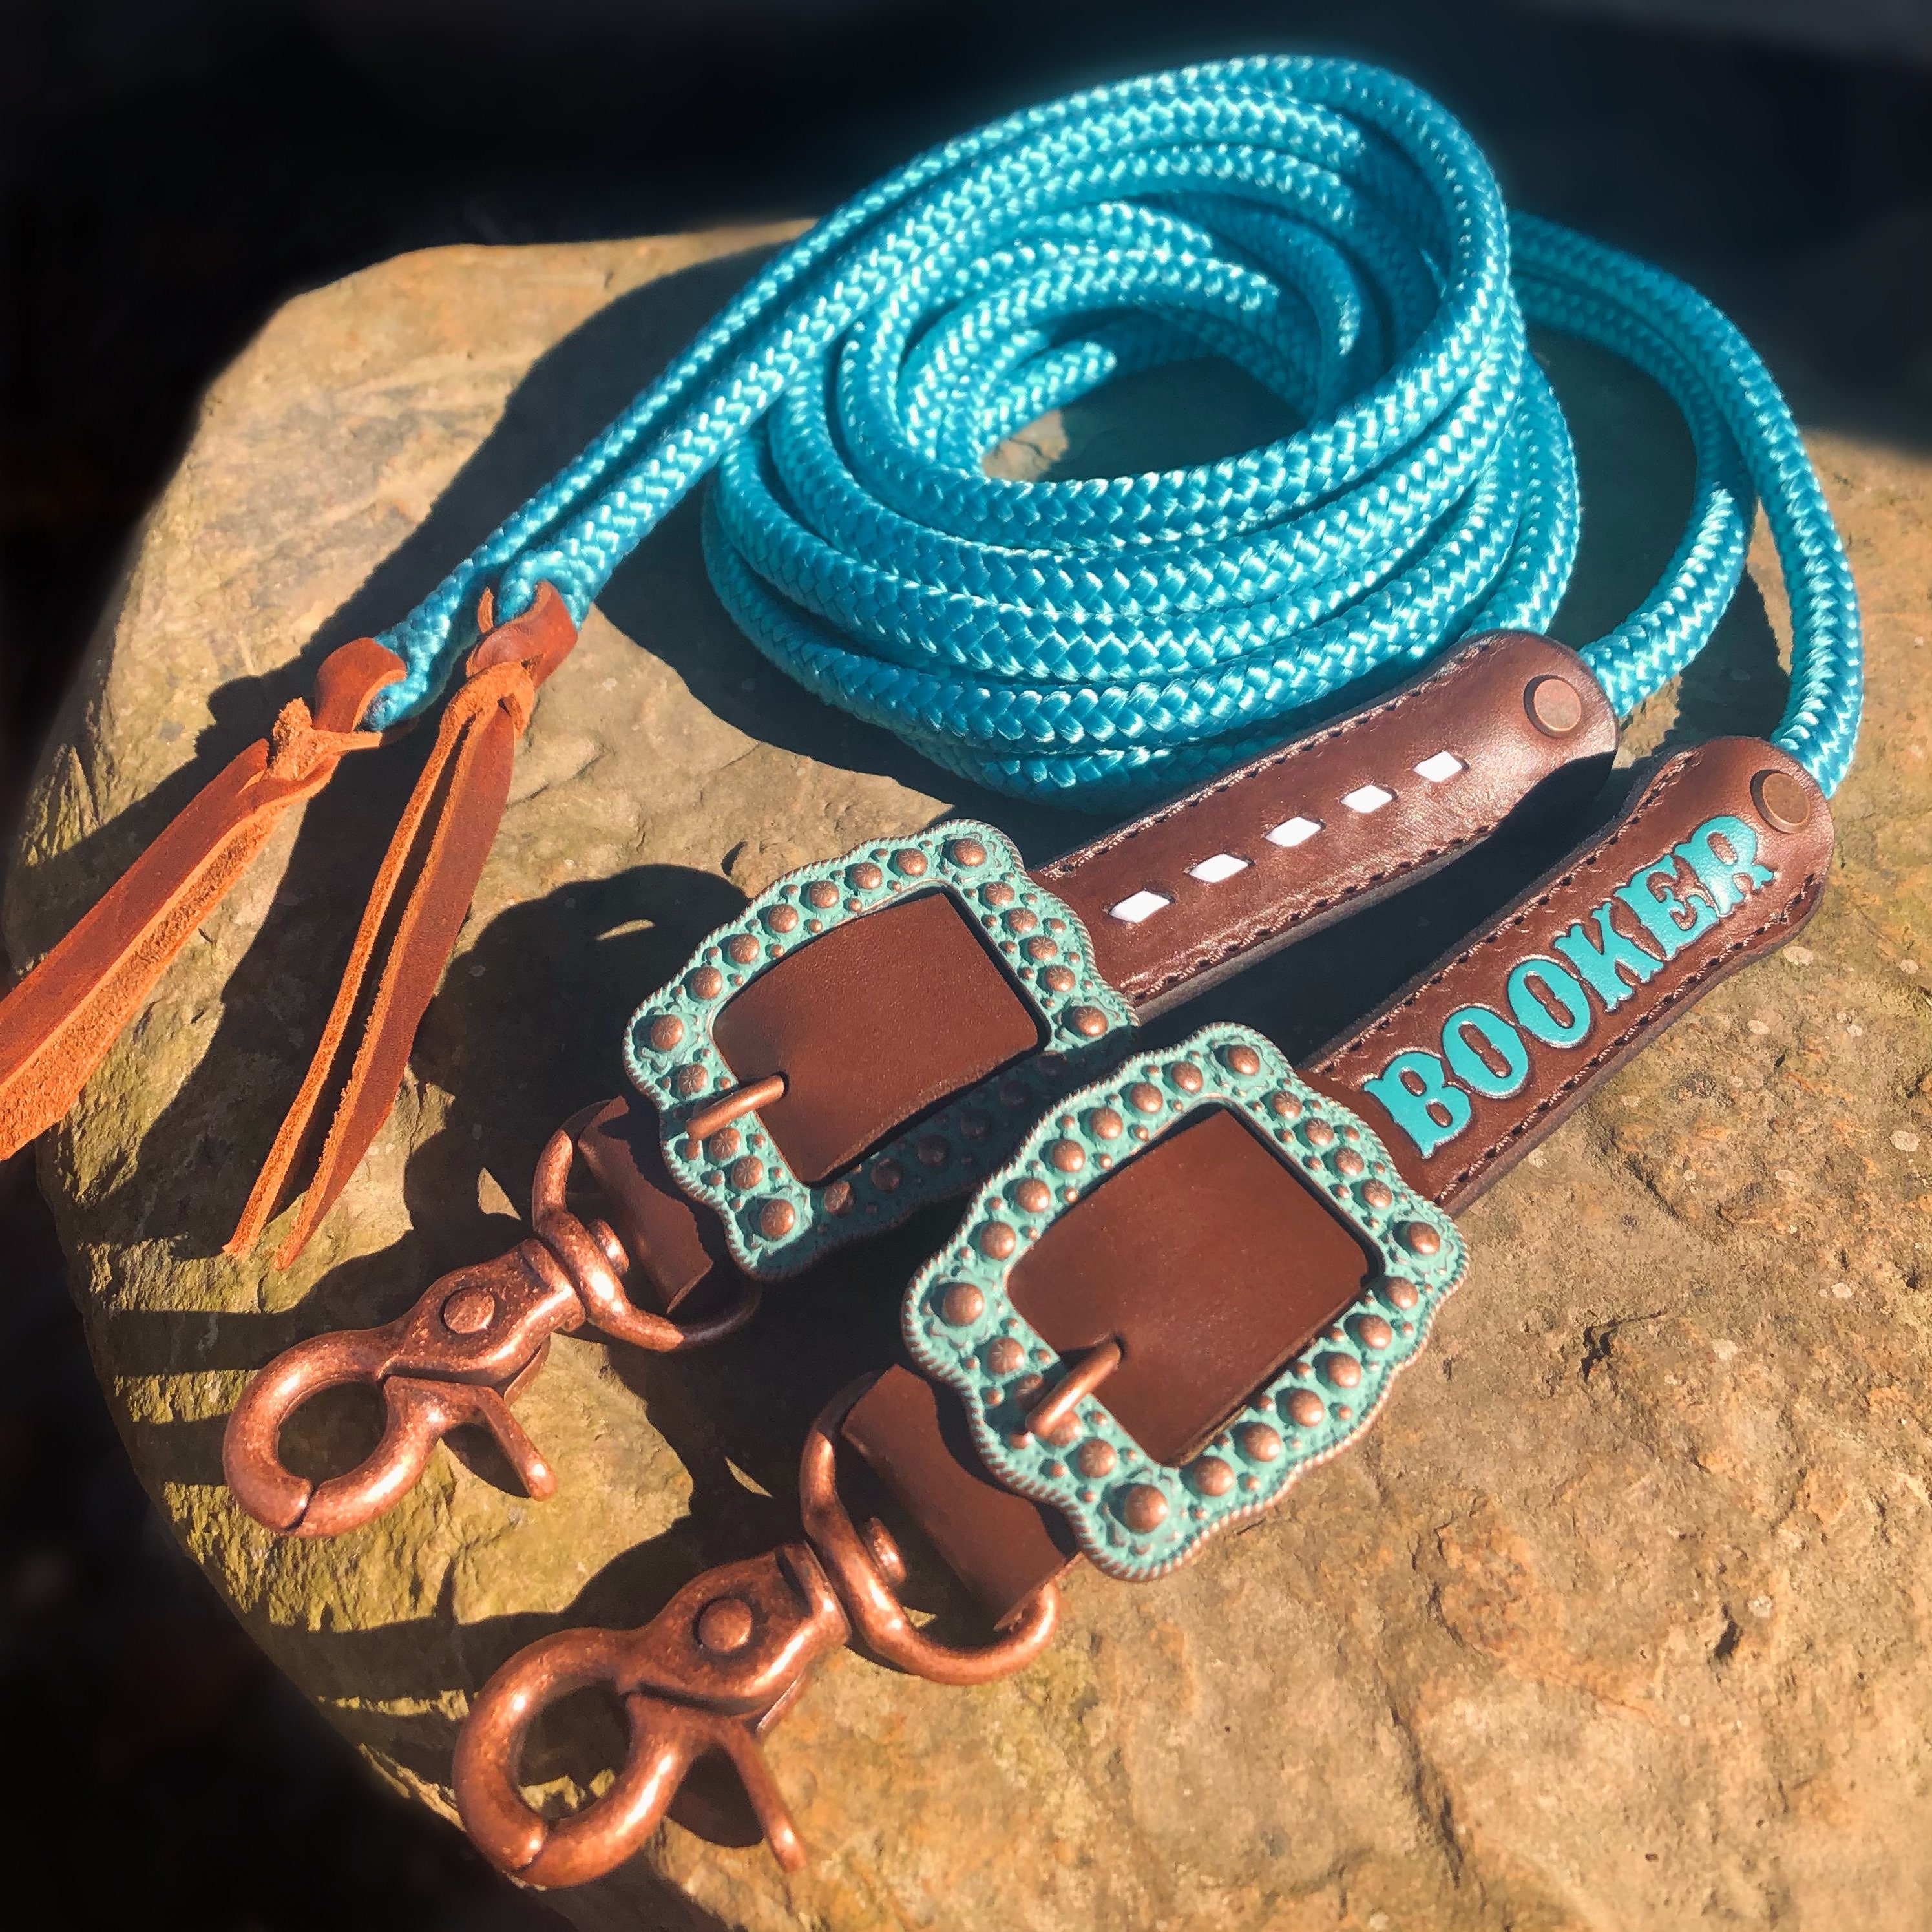 Customizable Leather and Rope Split Reins